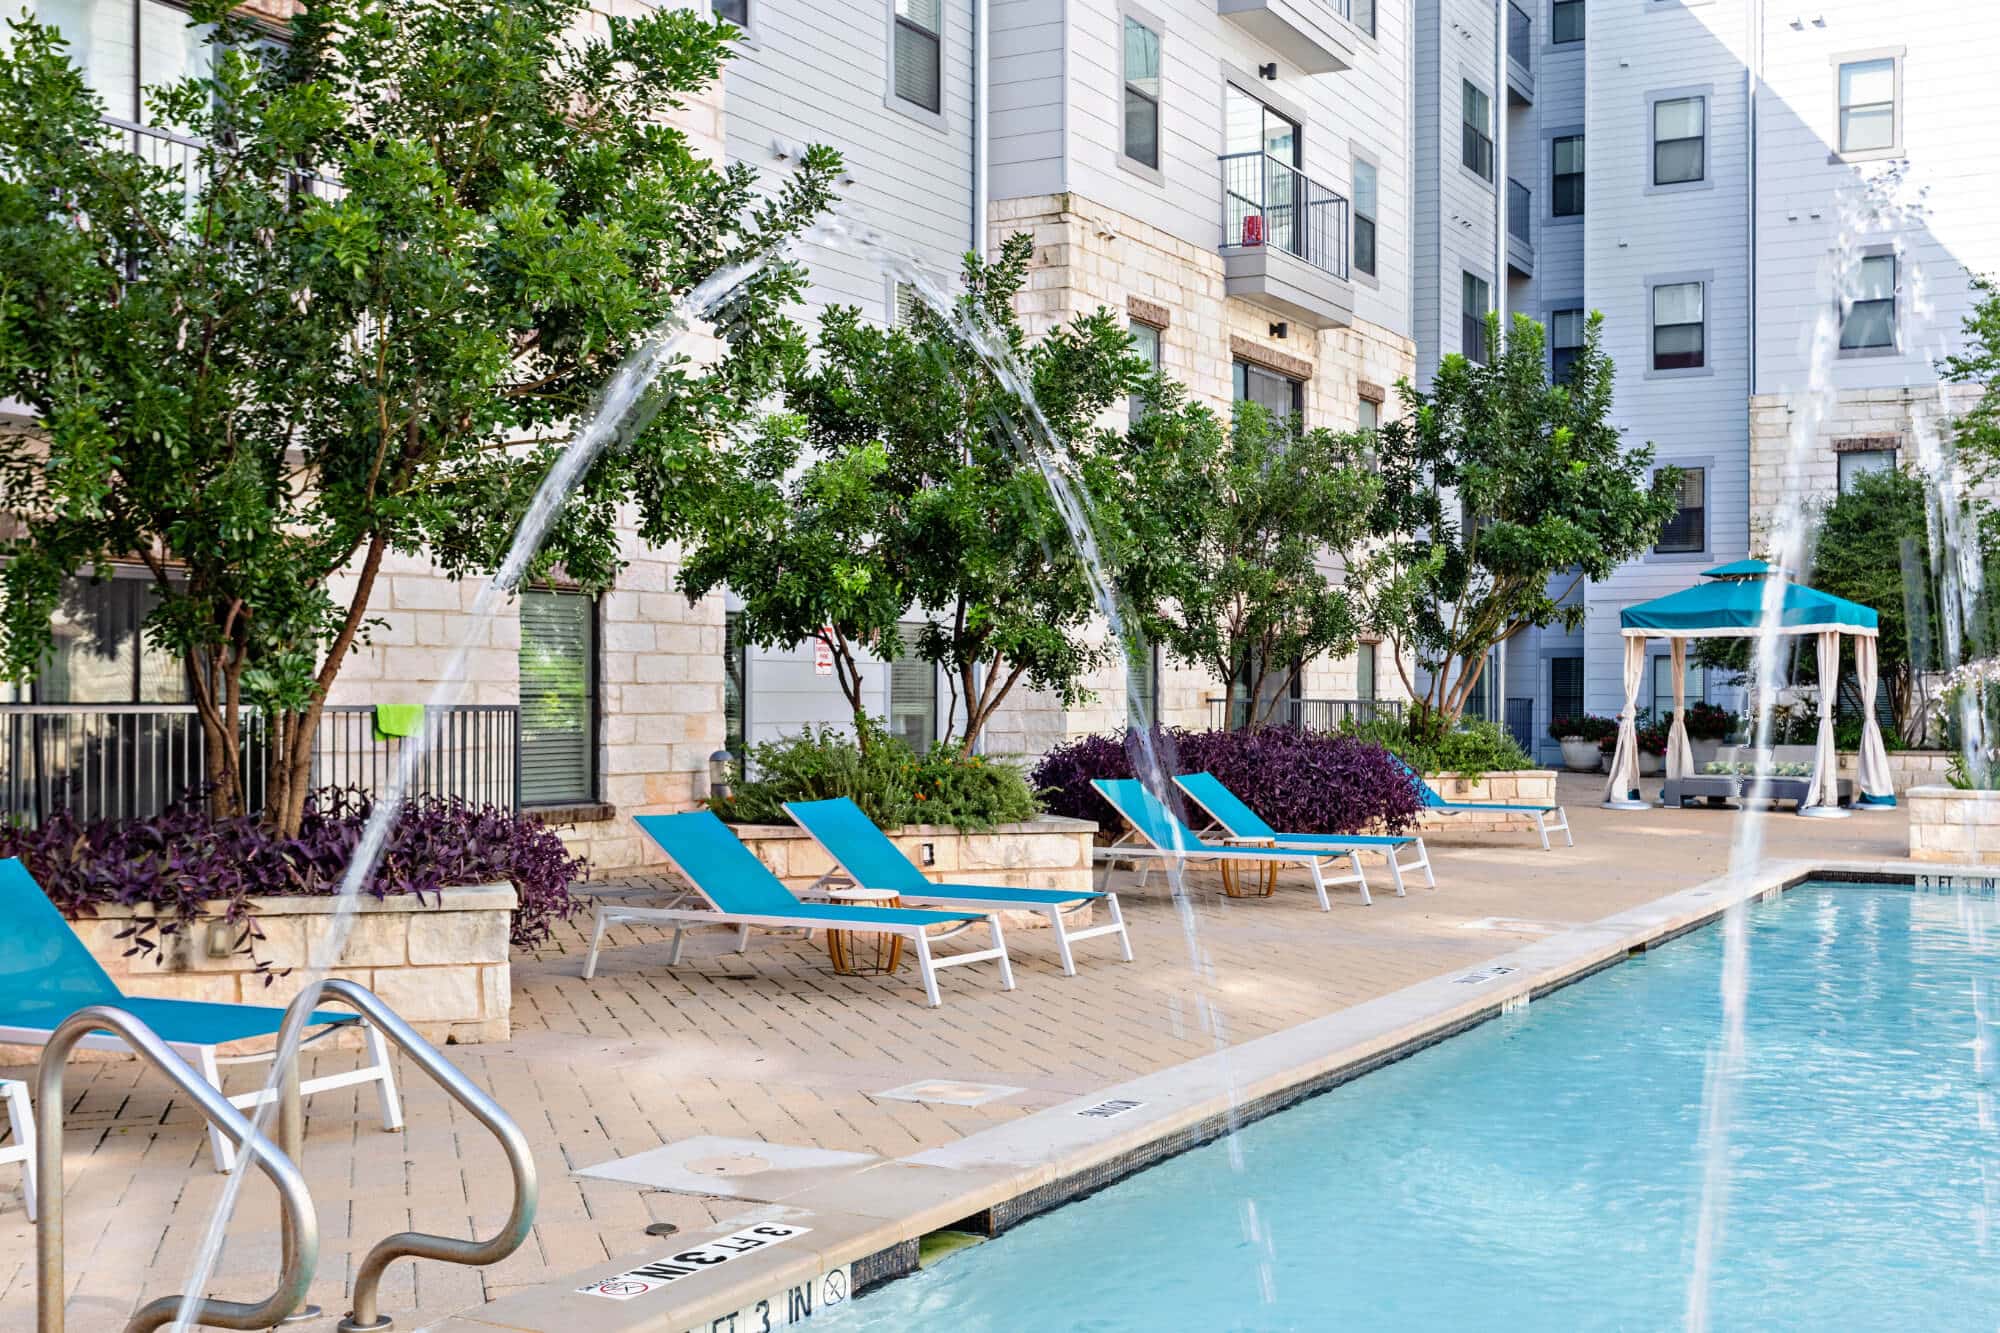 axis west campus off campus apartments in west campus near ut austin resort style pool cabanas and lounge seating